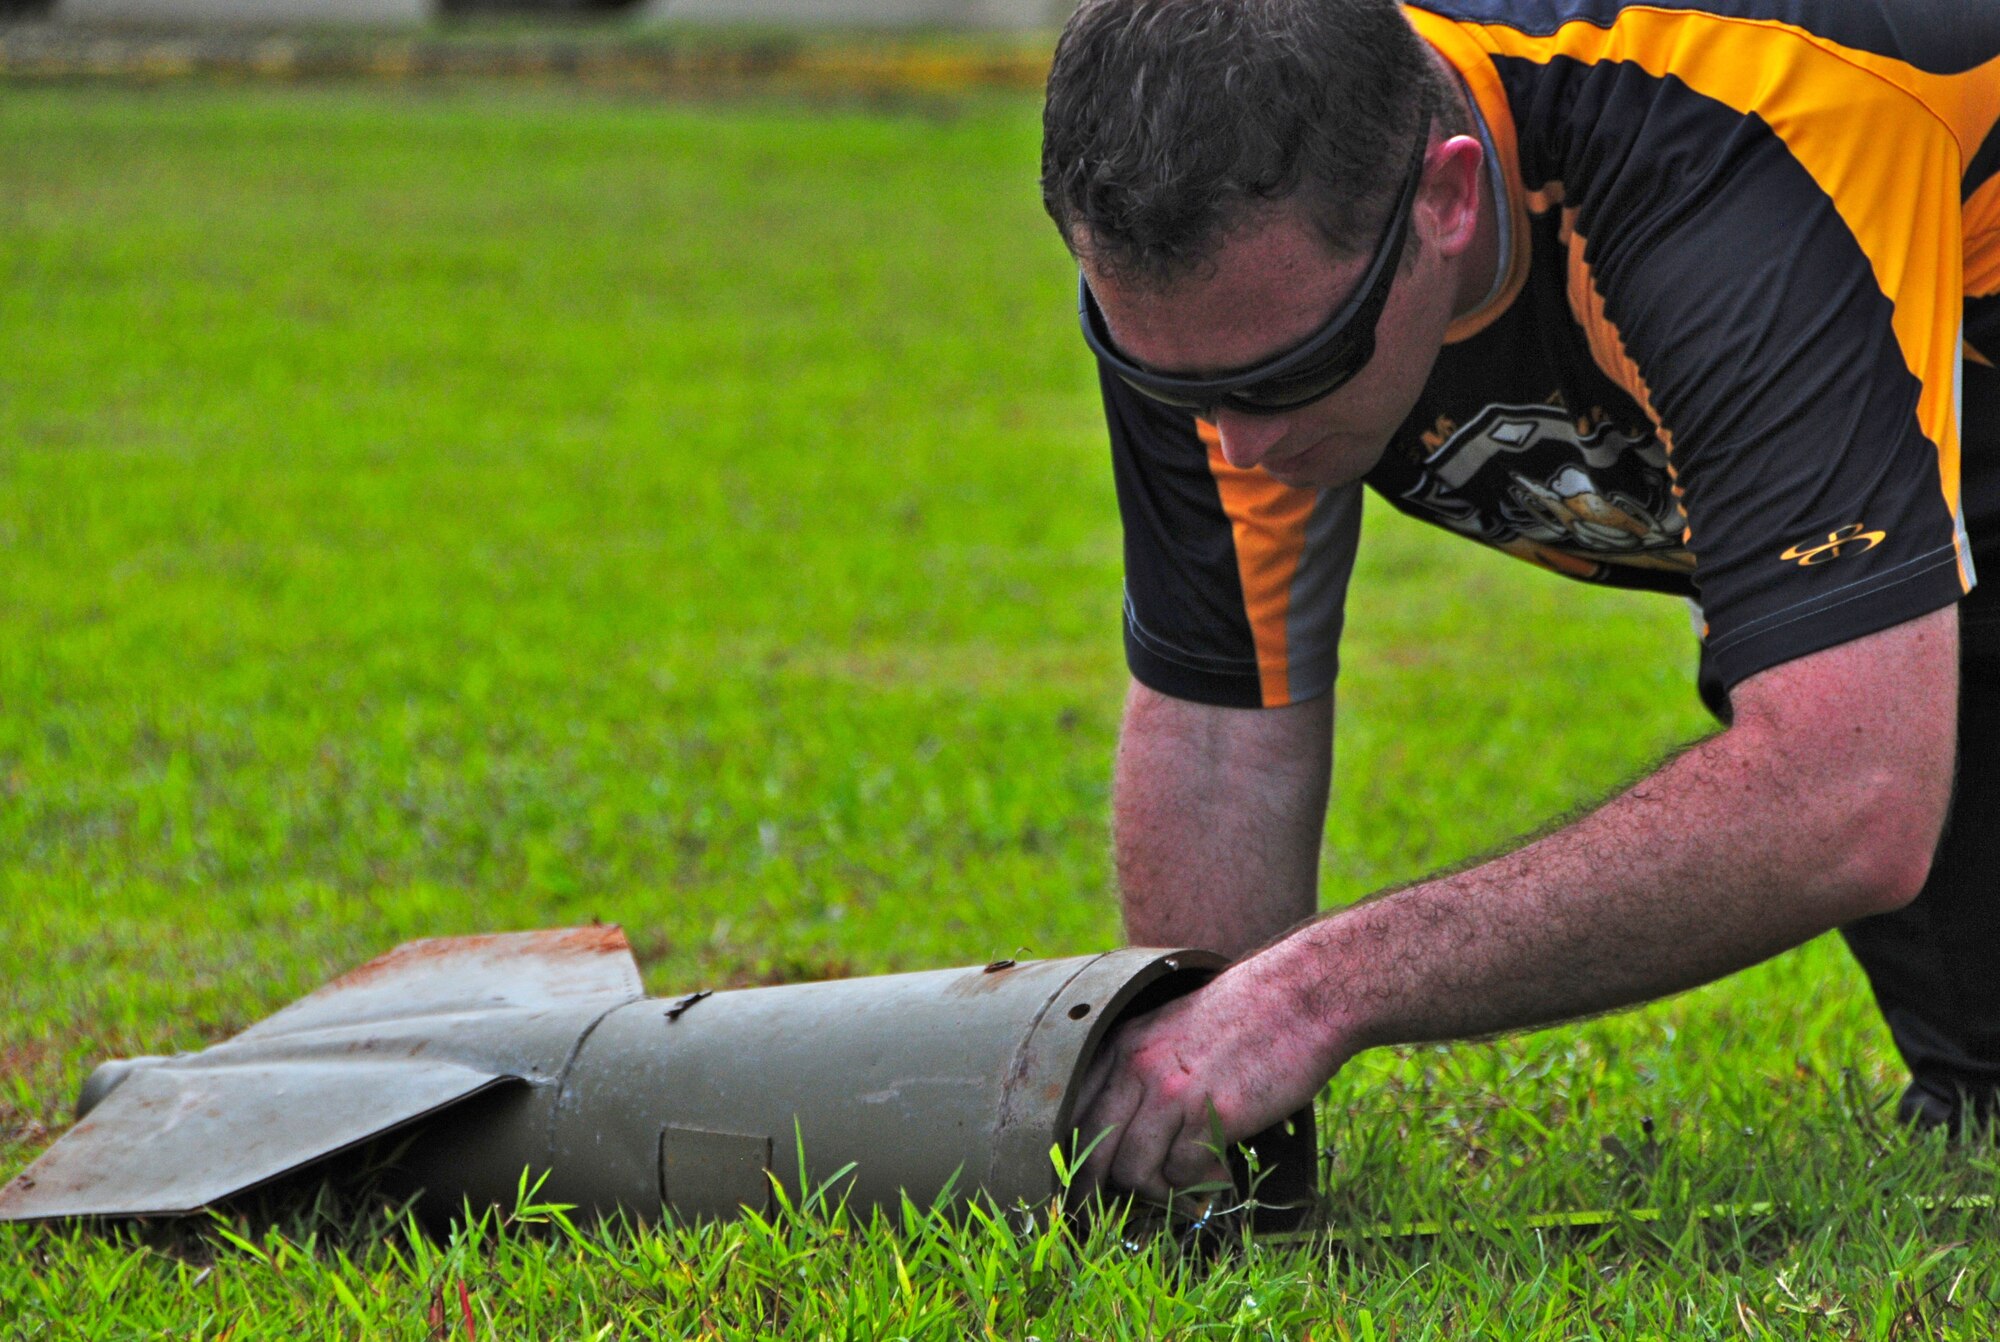 ANDERSEN AIR FORCE BASE, Guam -- Staff Sgt. Erick Cole, 36th Munitions Squadron munitions inspector, measures how far an Airman tossed a fin during the Ammo Olympics here, Aug. 30. The Ammo Olympics is an annual event where the Airmen of 36th Munitions Squadron build teams and compete with each other in events that test the Airmen’s strength, teamwork and ingenuity. (U.S. Air Force photo by Airman 1st Class Marianique Santos/Released)